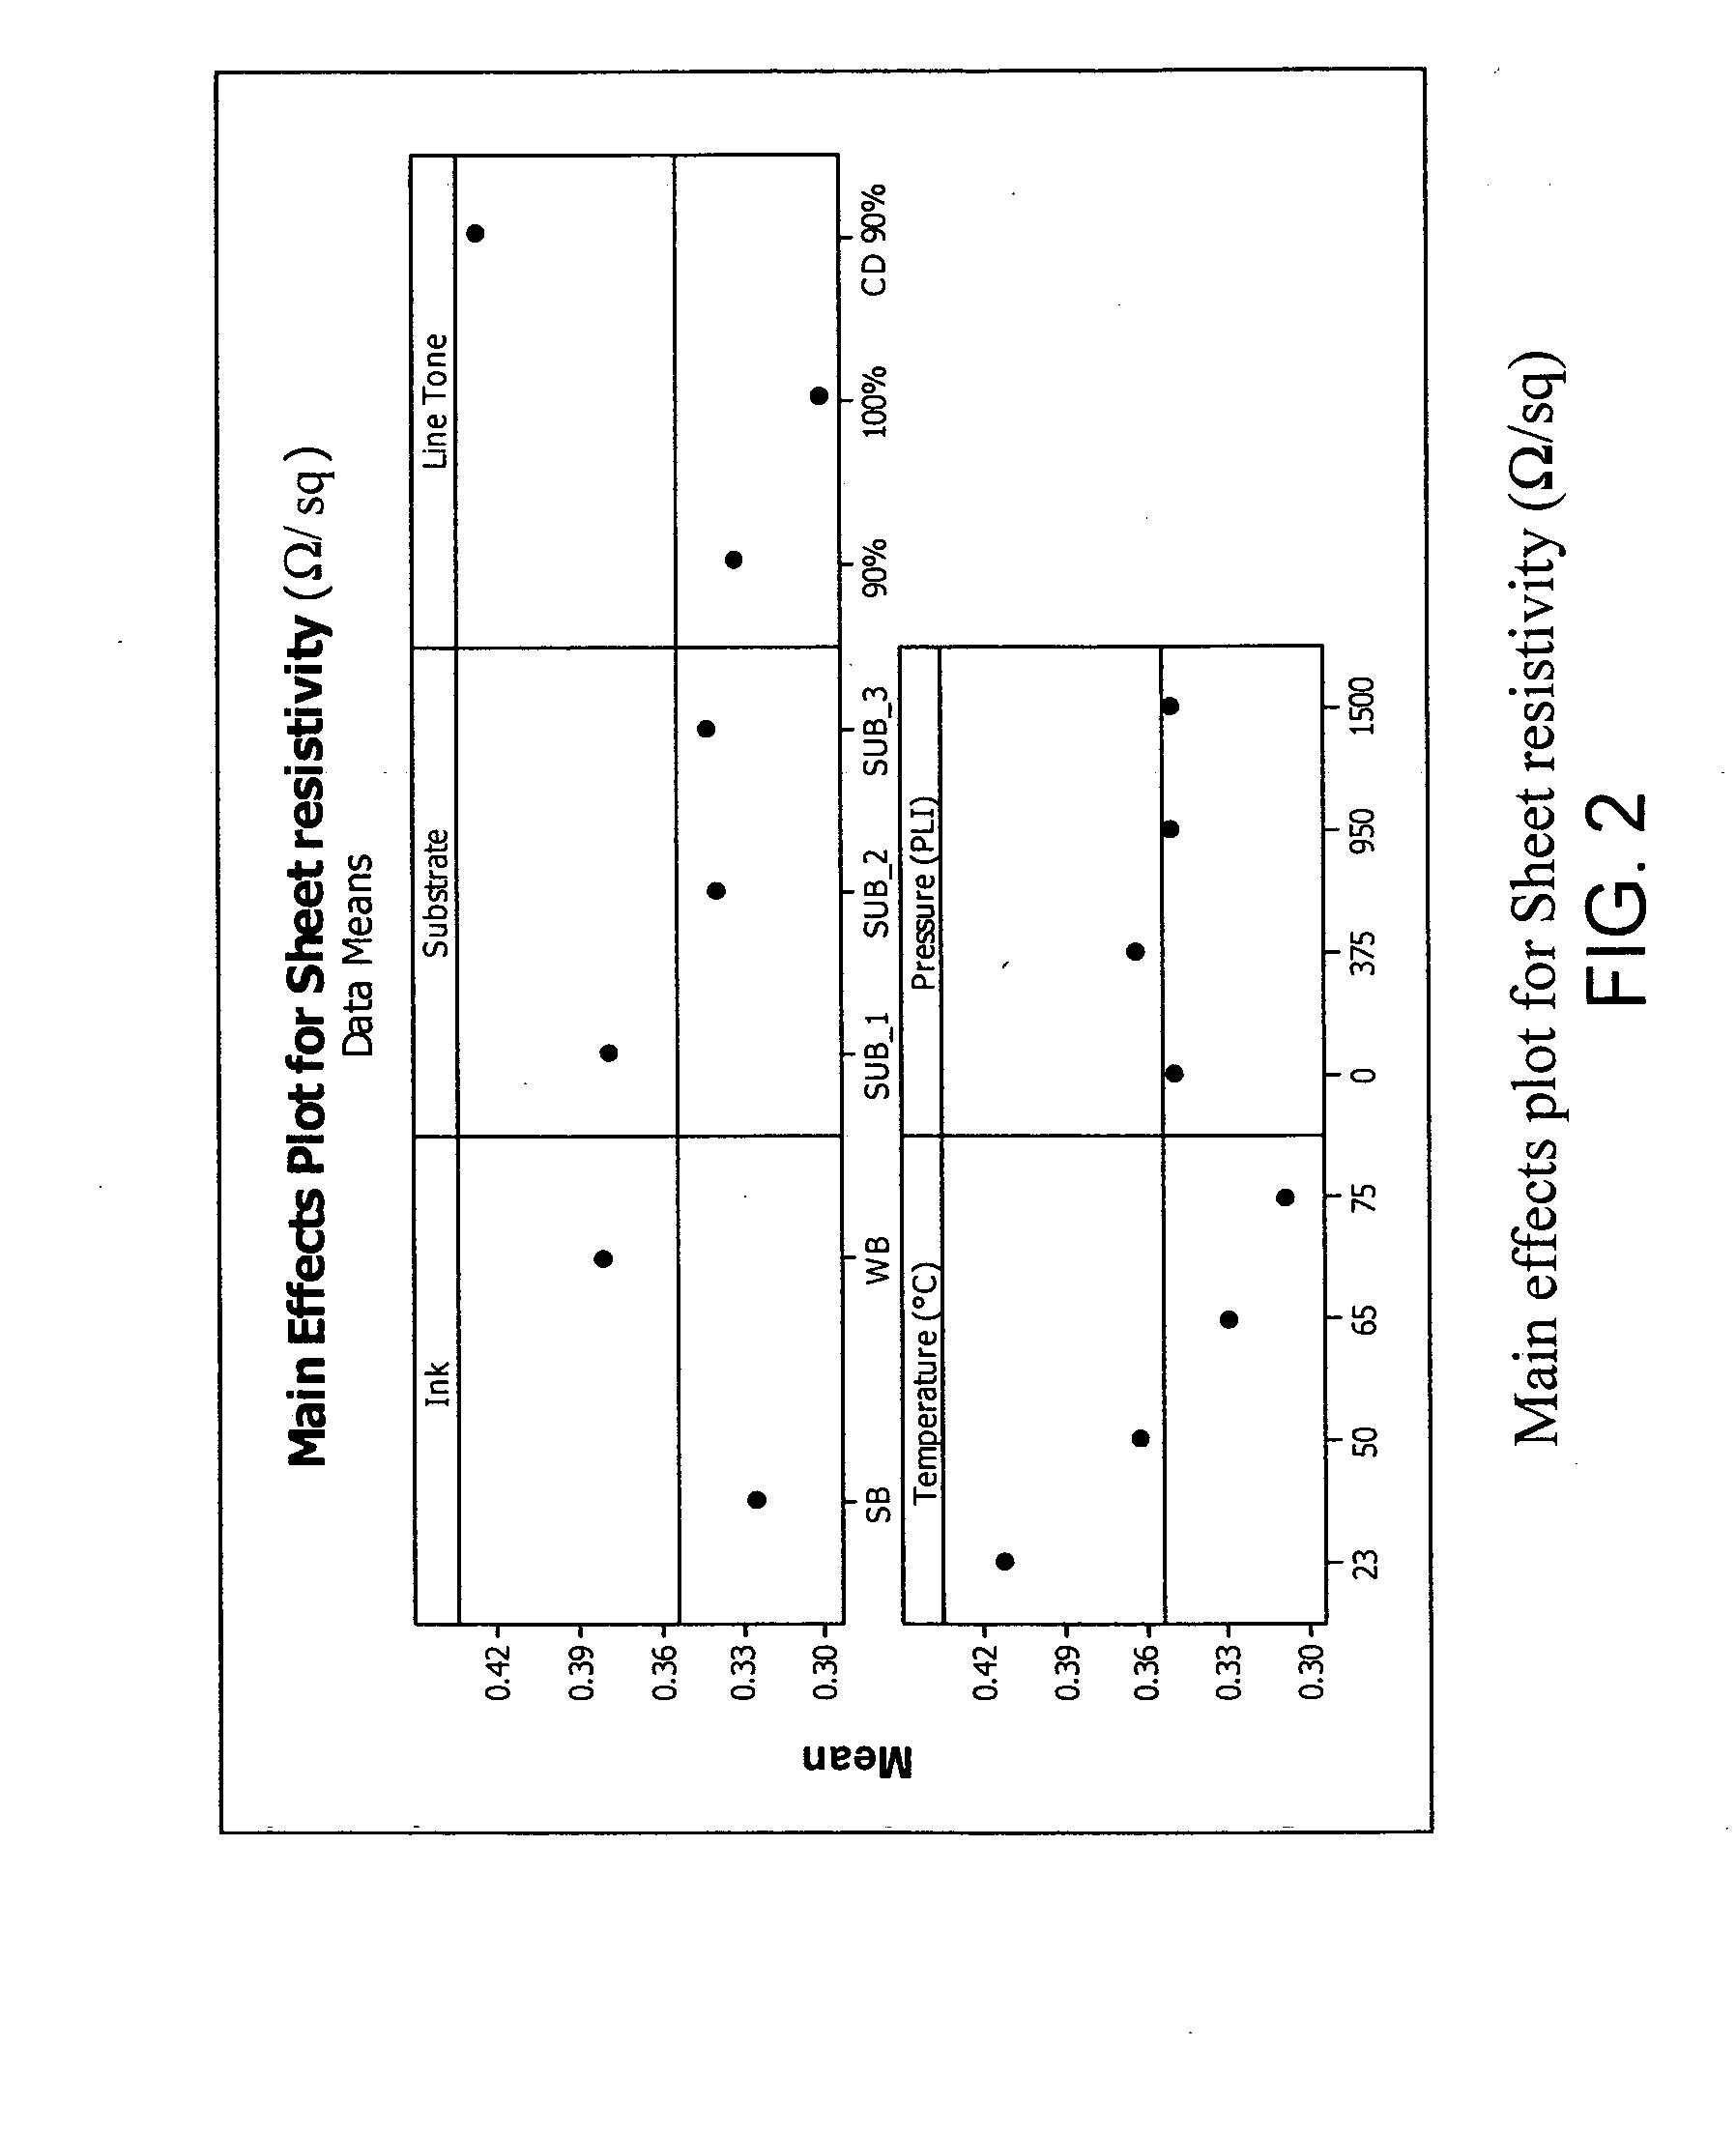 Method of improving the electrical conductivity of a conductive ink trace pattern and system therefor